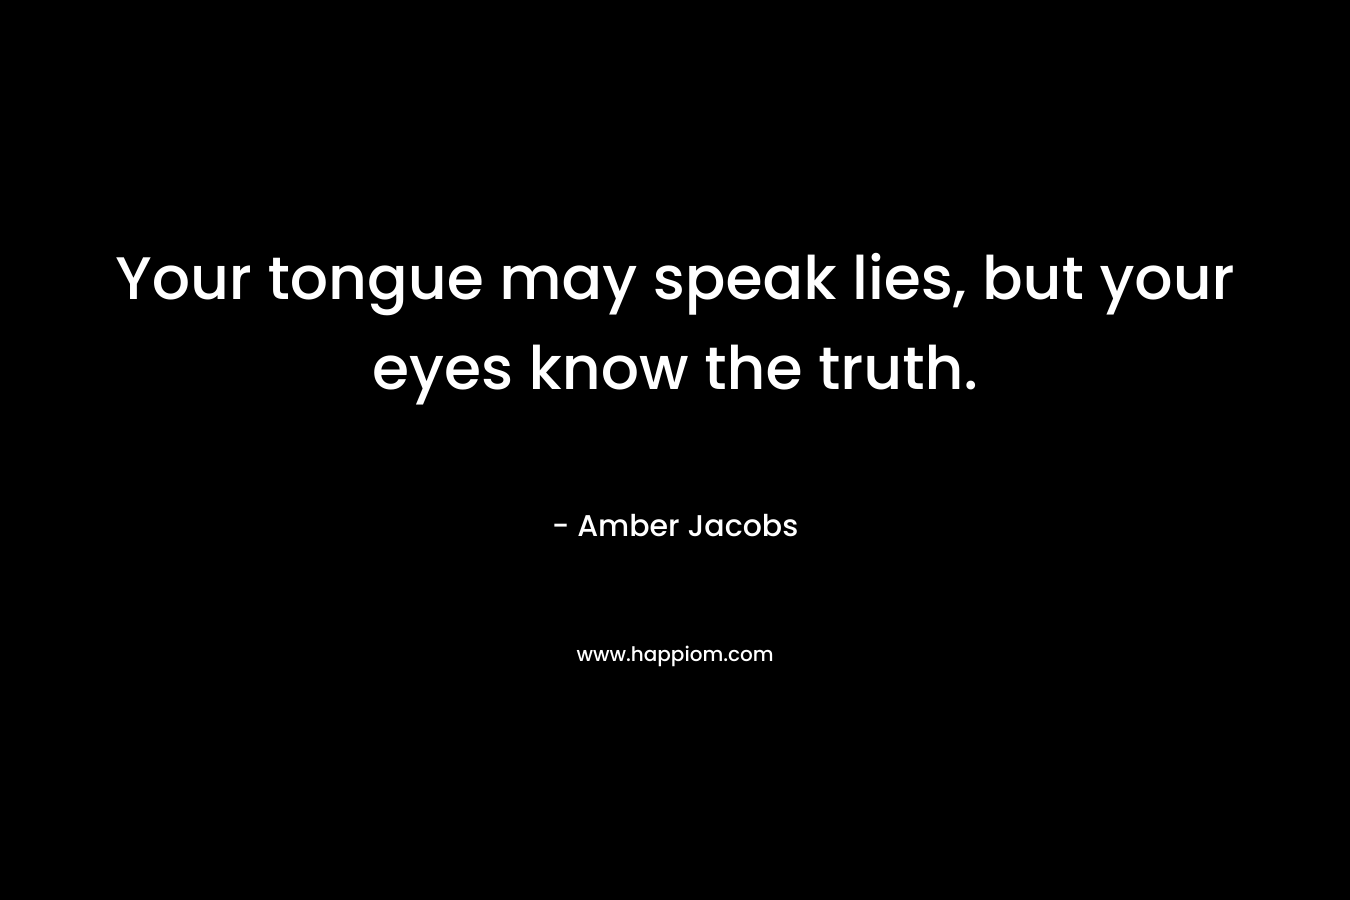 Your tongue may speak lies, but your eyes know the truth.